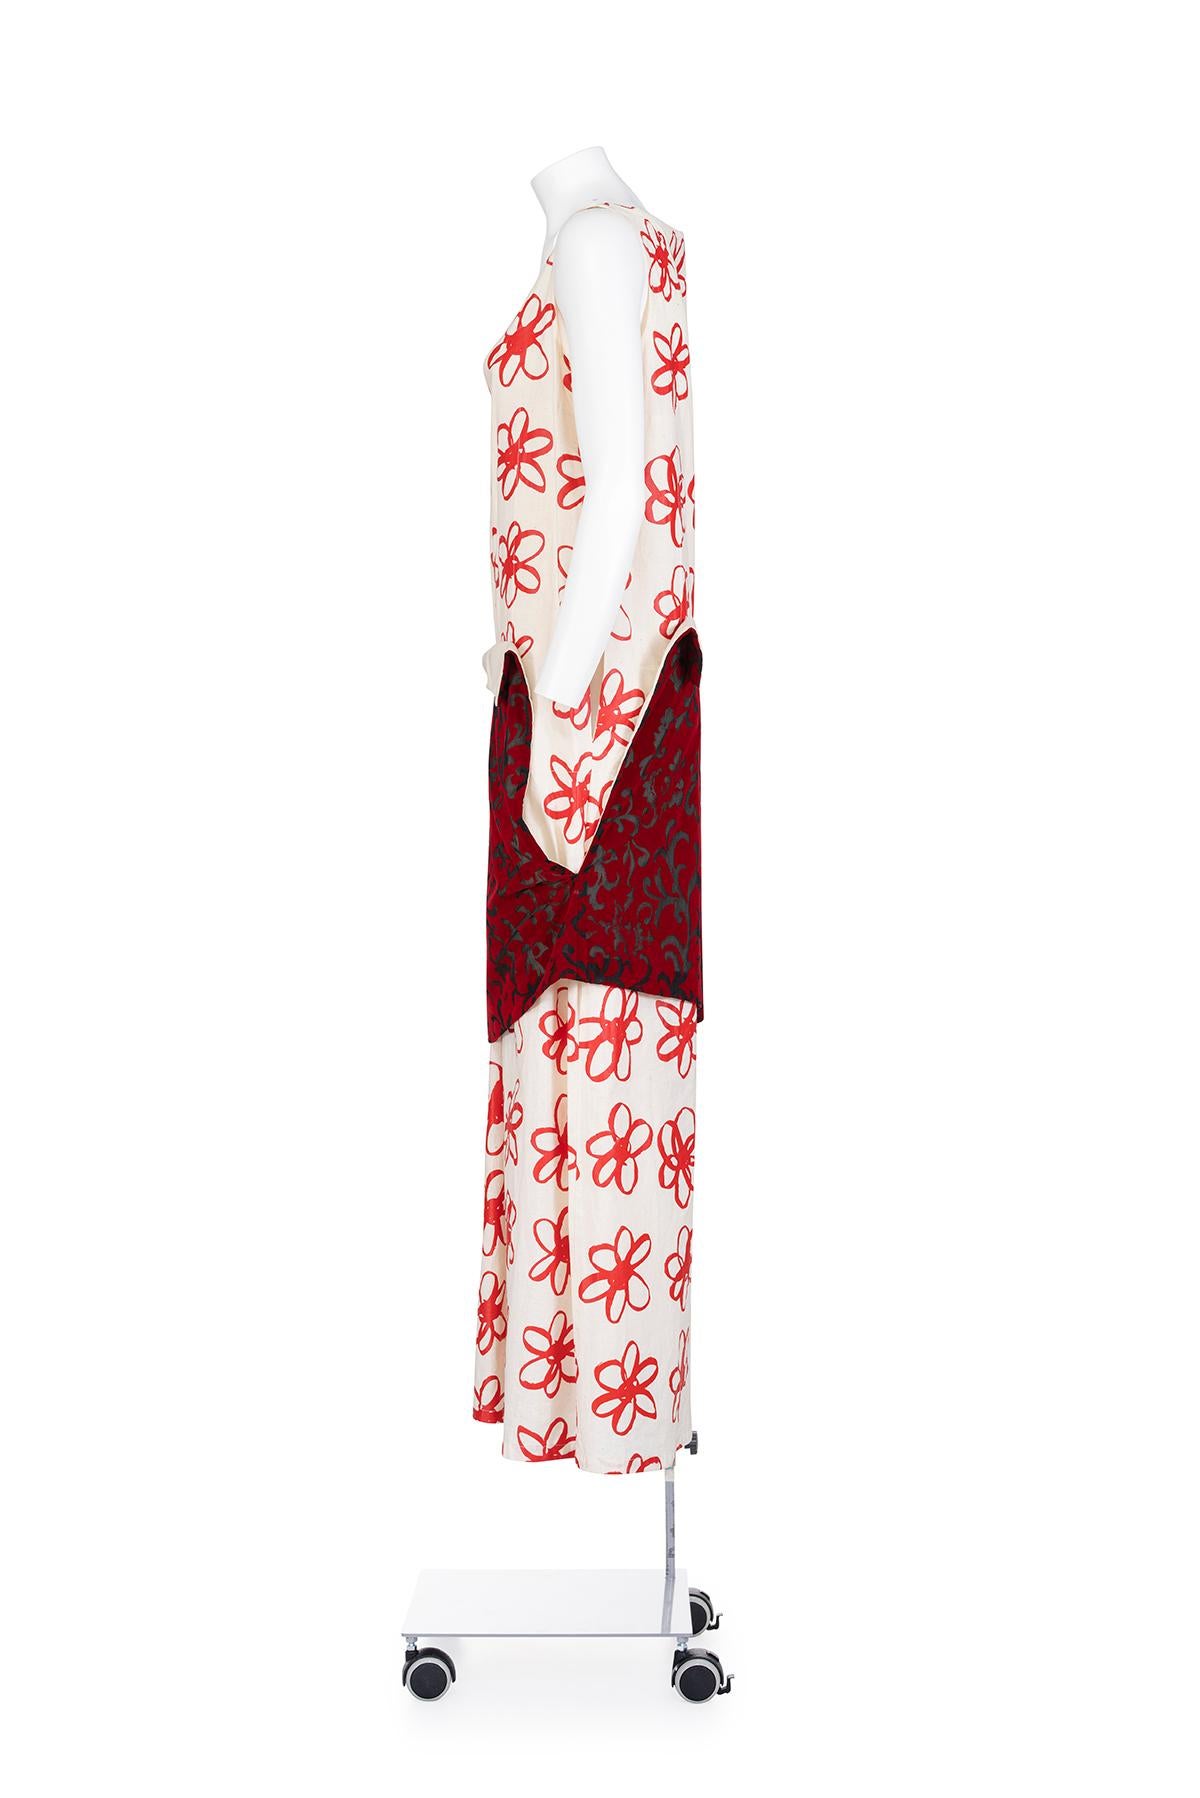 COMME DES GARÇONS FW 98 Iconic and Rare Floral Pattern Long Dress In Excellent Condition For Sale In Milano, MILANO